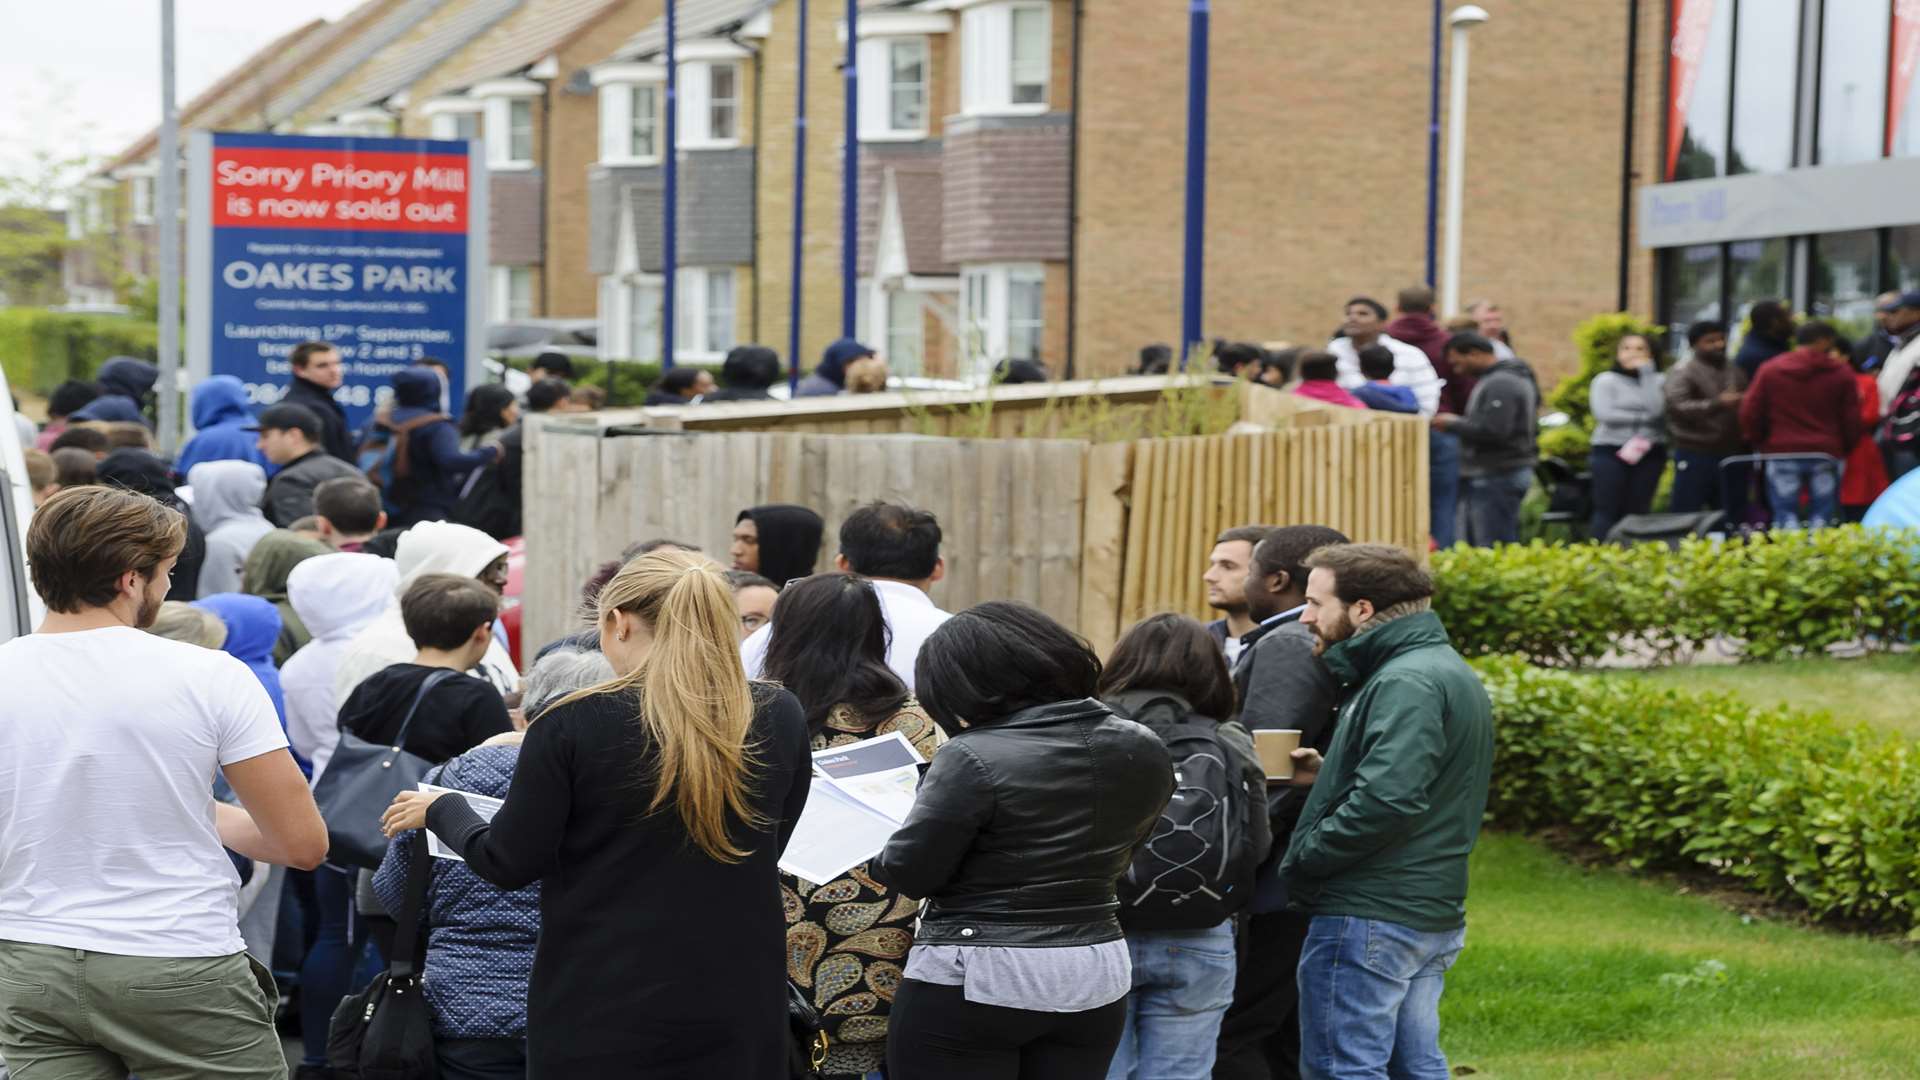 The queue stretched 30m along Lawson Road. Bellway Homes launch their new housing project, Oakes Park.